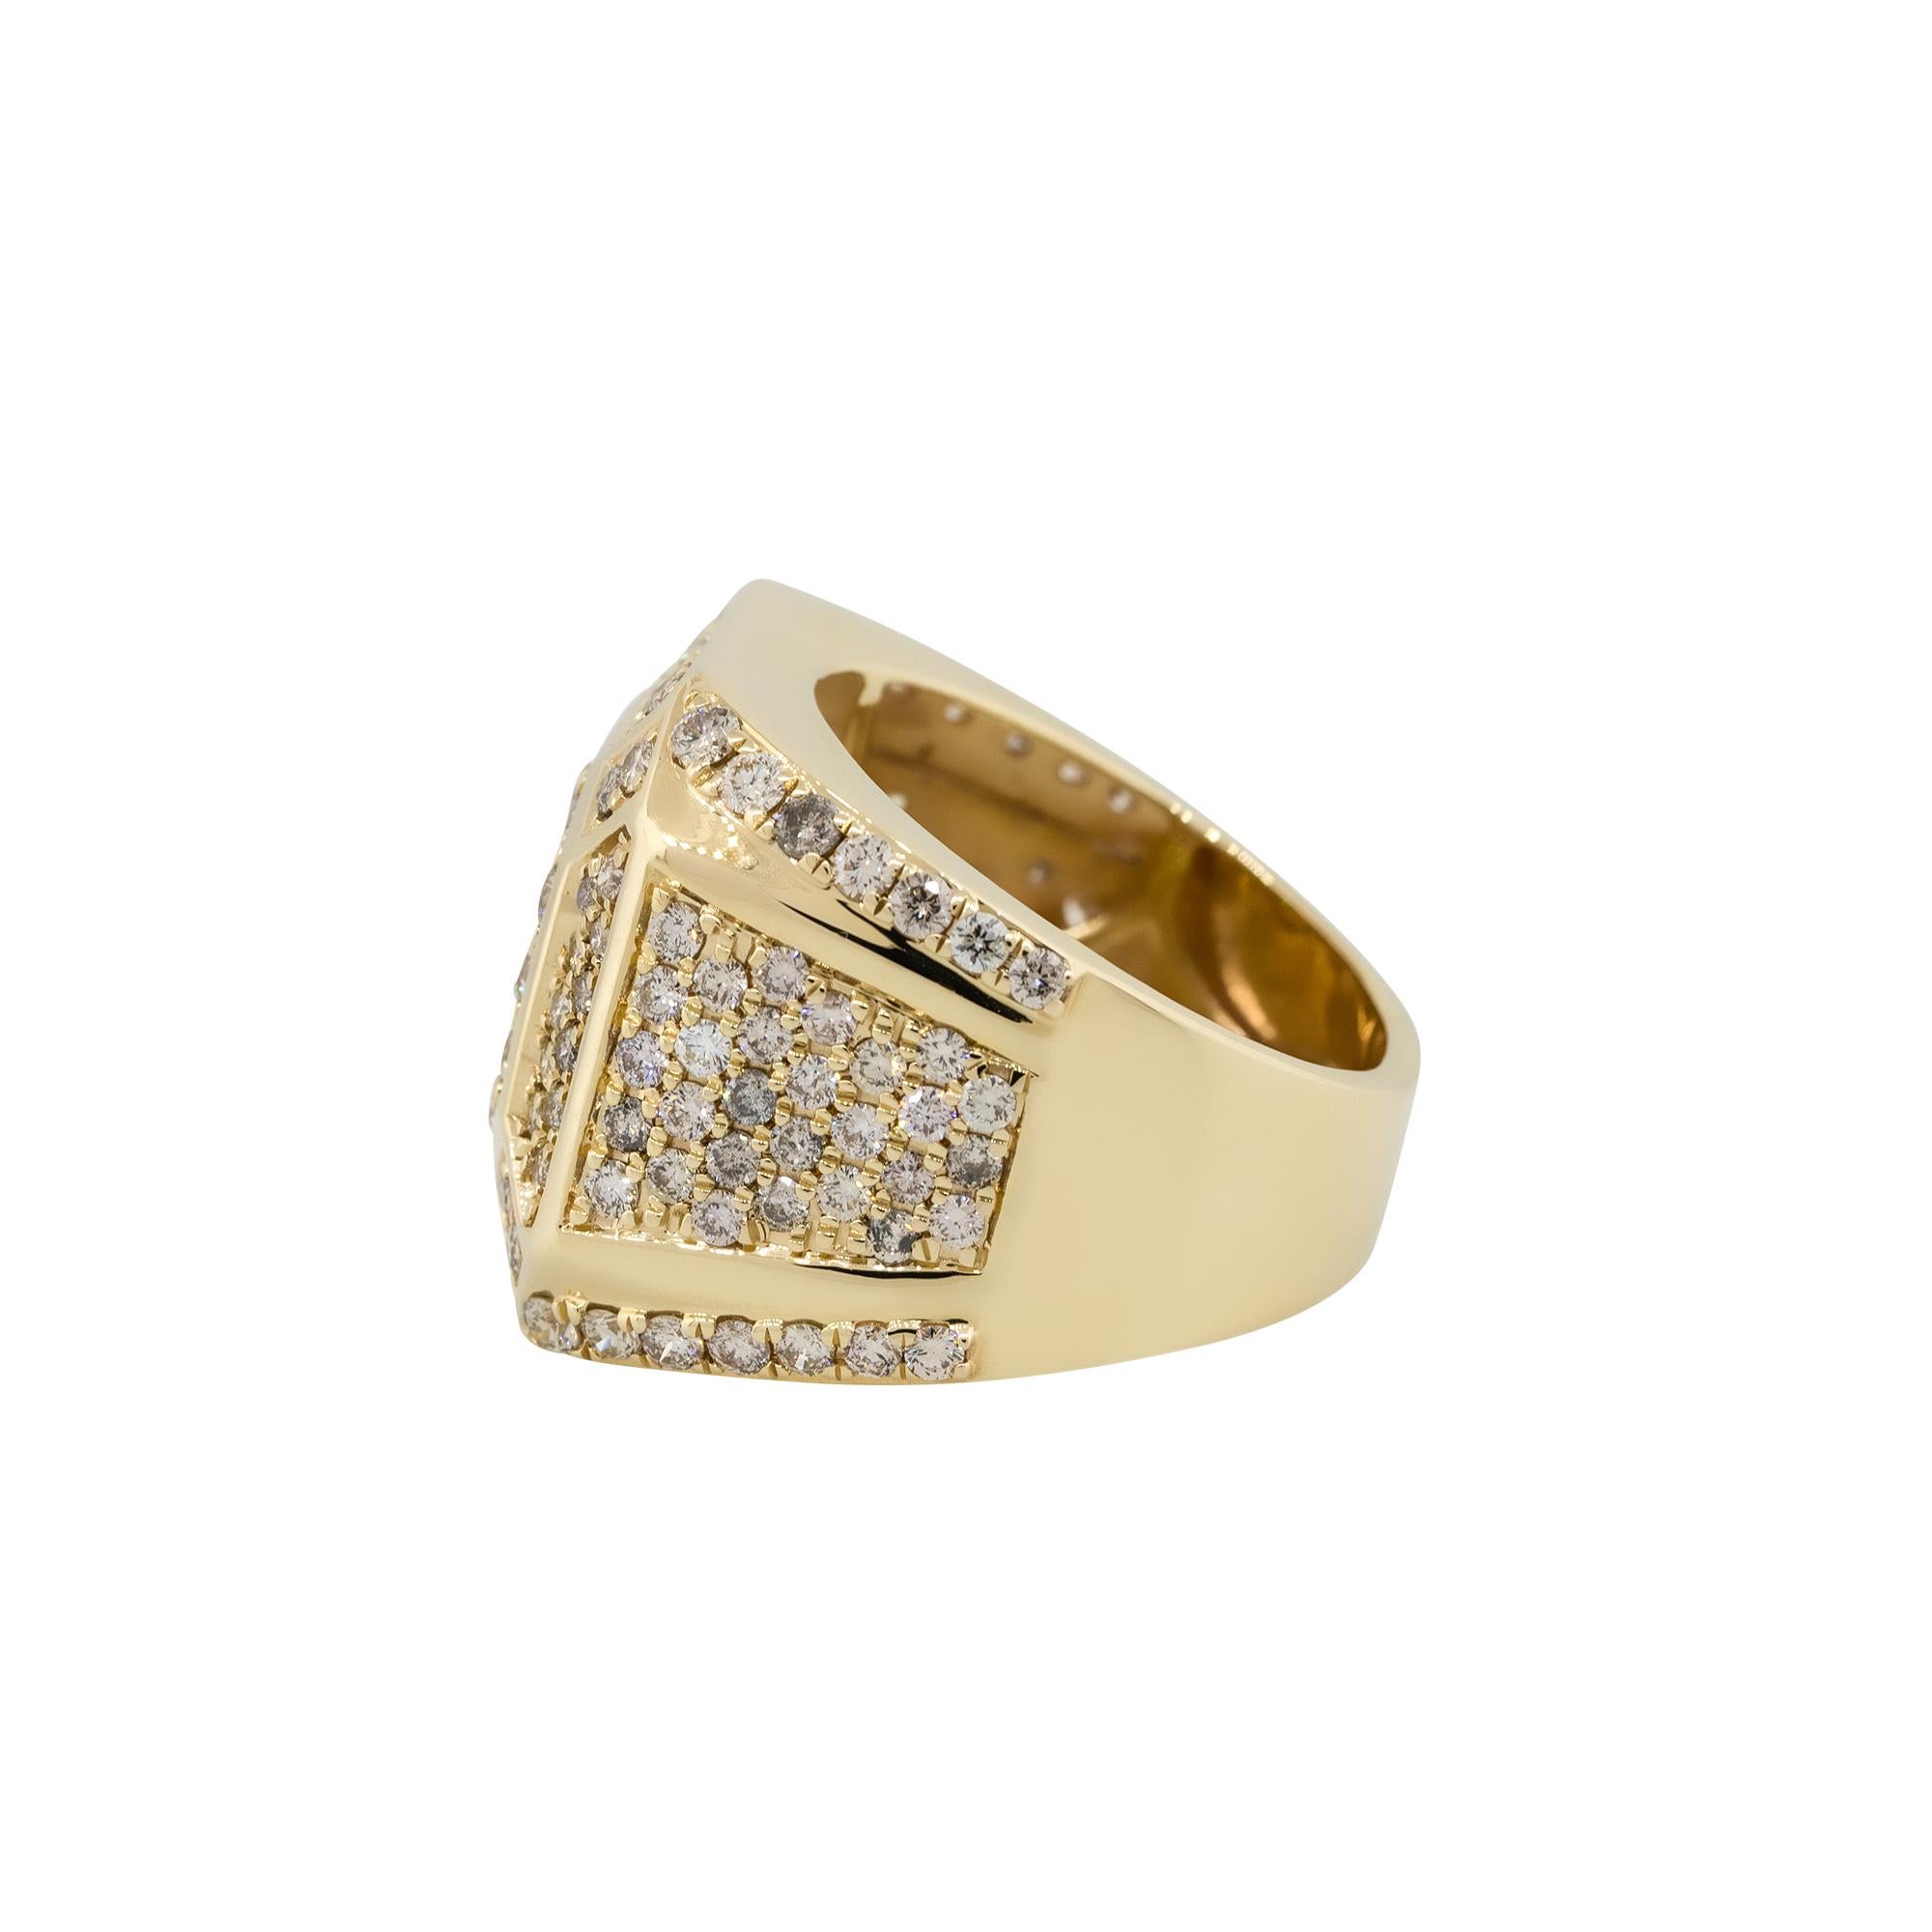 Round Cut 4 Carat Diamond Pave Vintage Style Mens Ring 14 Karat in Stock For Sale